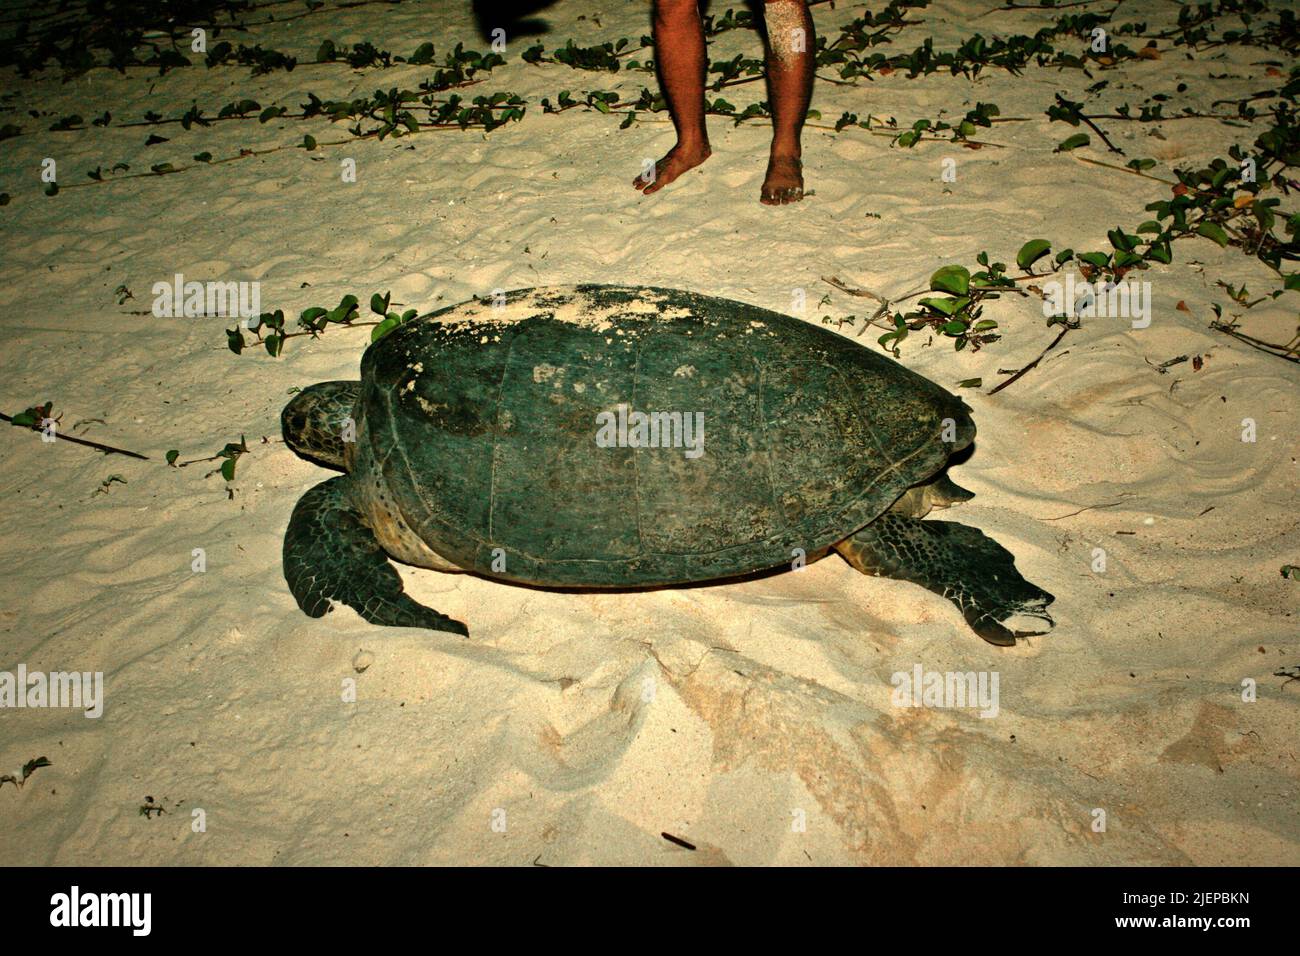 A green sea turtle (Chelonia mydas) crawling on the beach, heading back to the sea after laying its eggs at night on Sangalaki Island, an island dedicated to sea turtle conservation and a part of of Berau Marine Protected Area within Derawan archipelago in Berau, East Kalimantan, Indonesia. Stock Photo